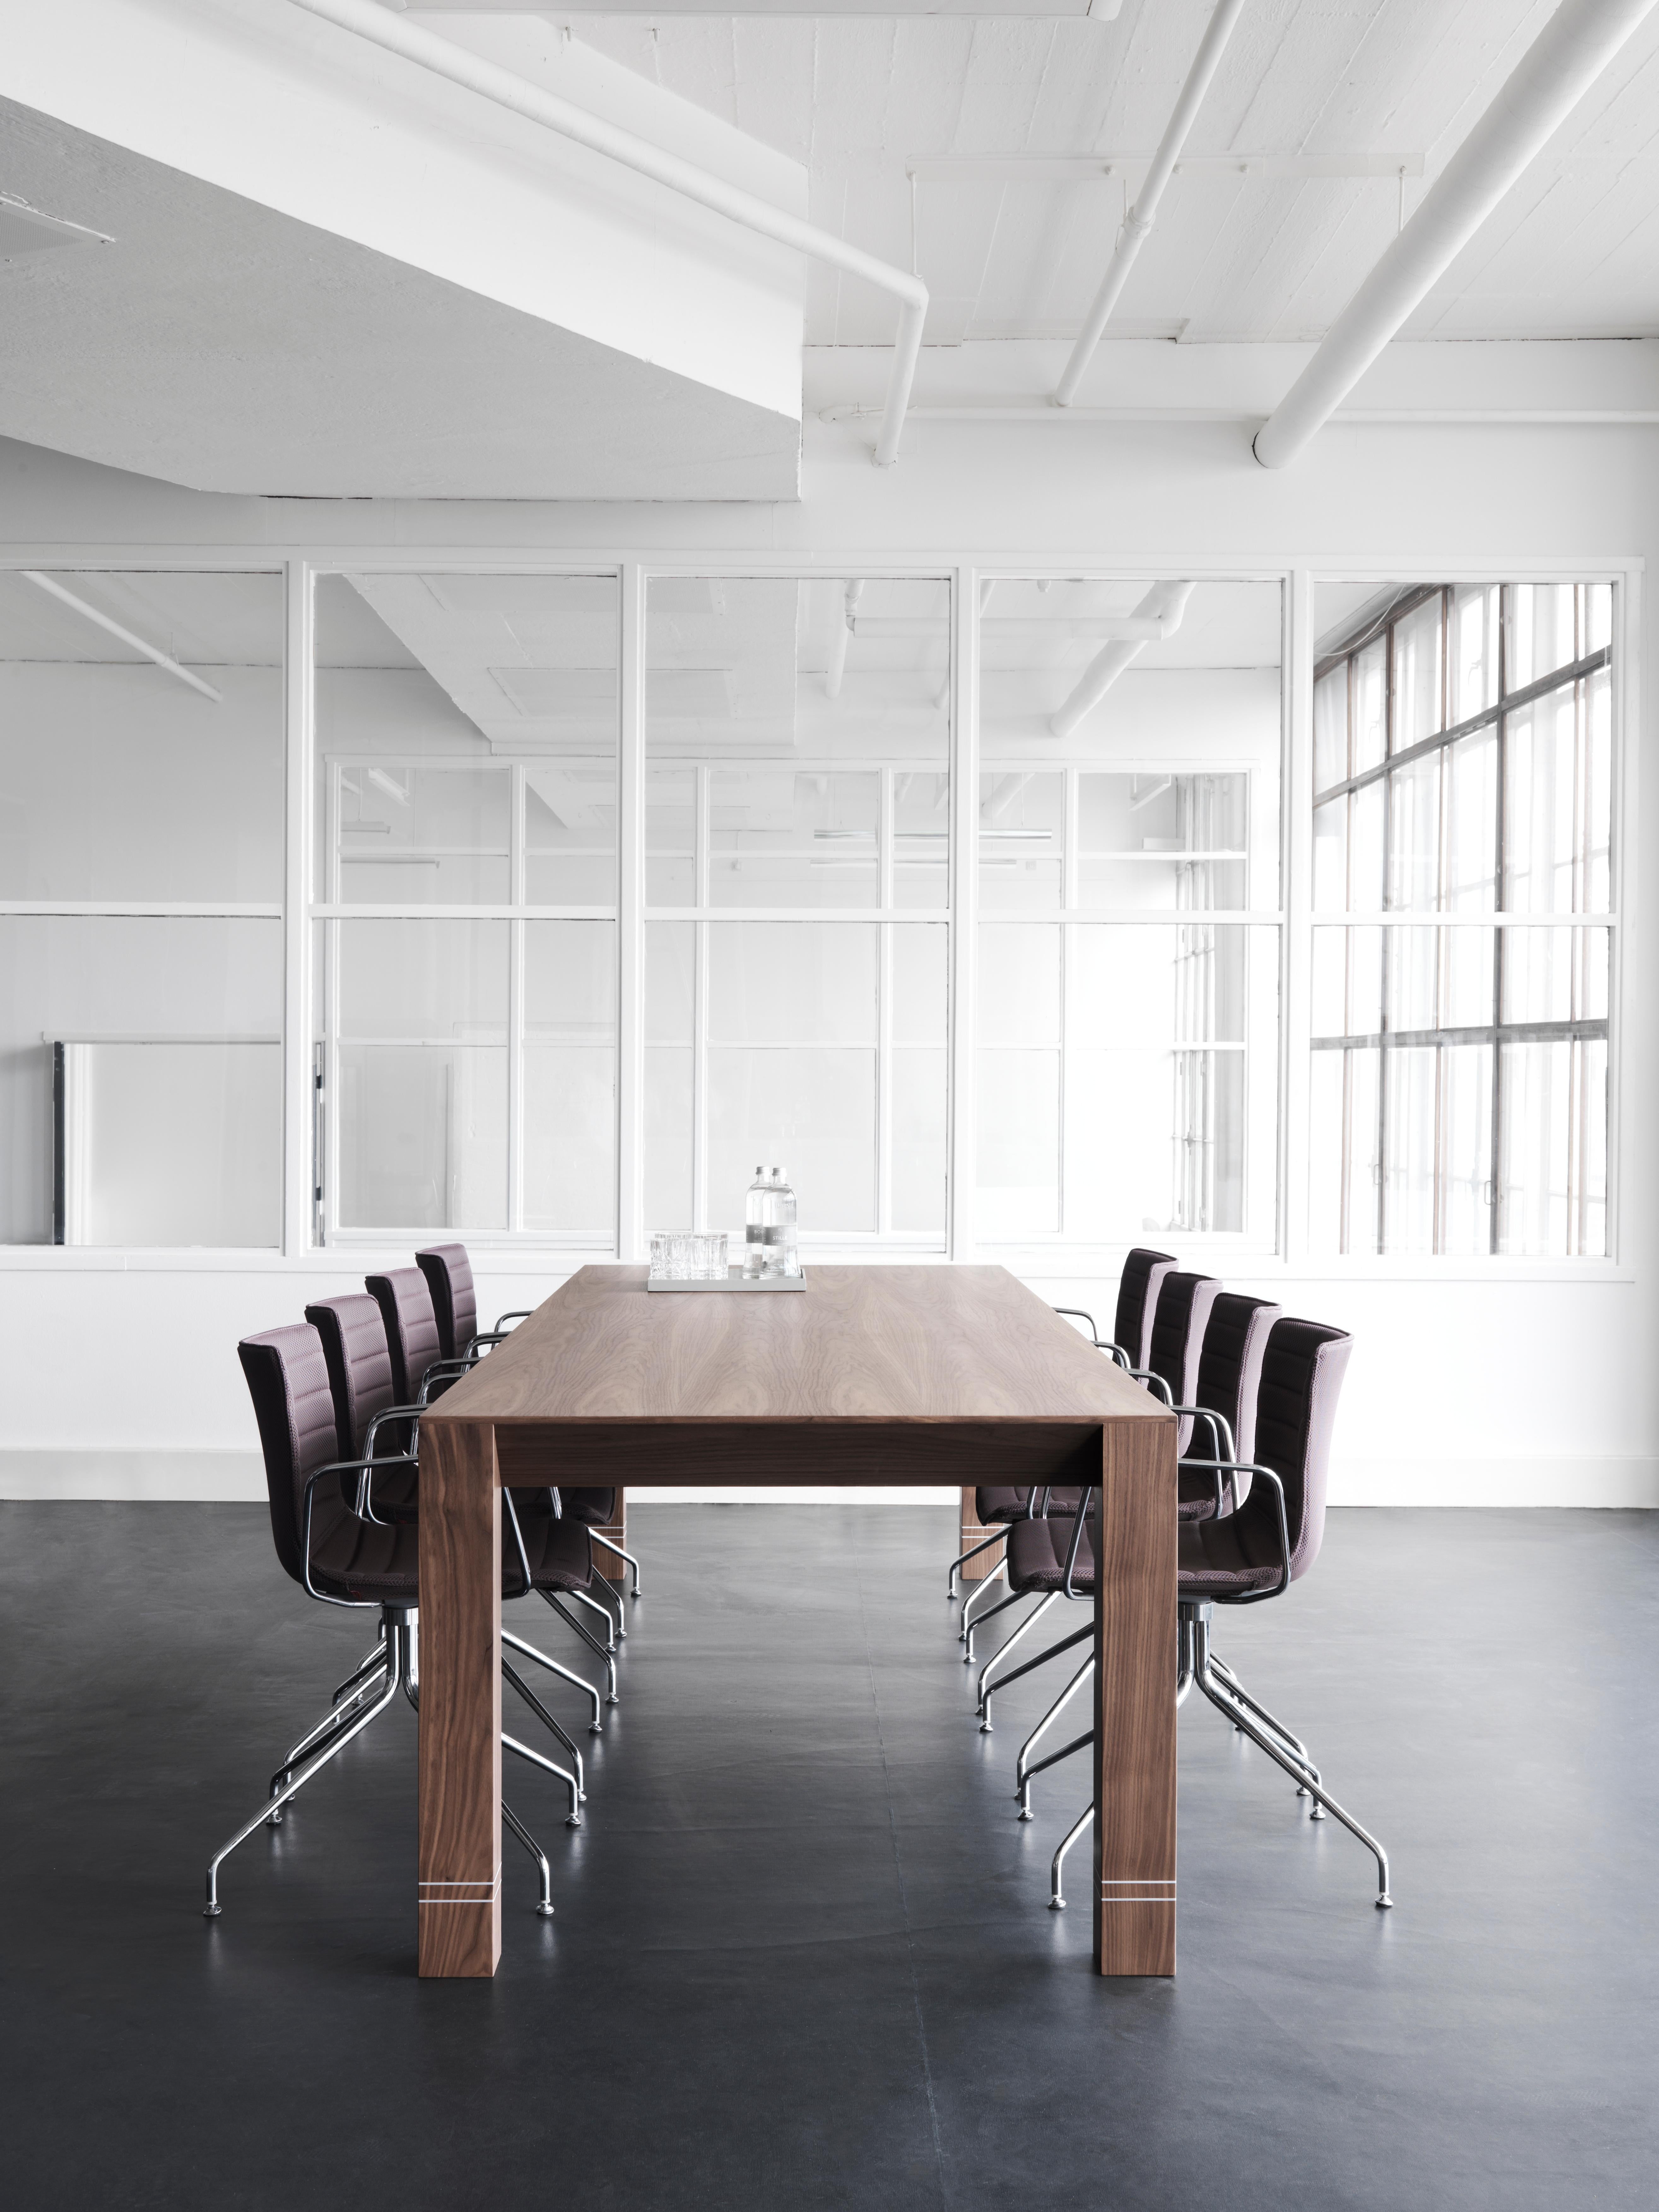 Made to encourage creativity and productivity, Il Grand Papá is a spacious and elegant solution for office use. While the design is simple, grandeur is added through the notable size of the table, adding a sense of authority to the room. The